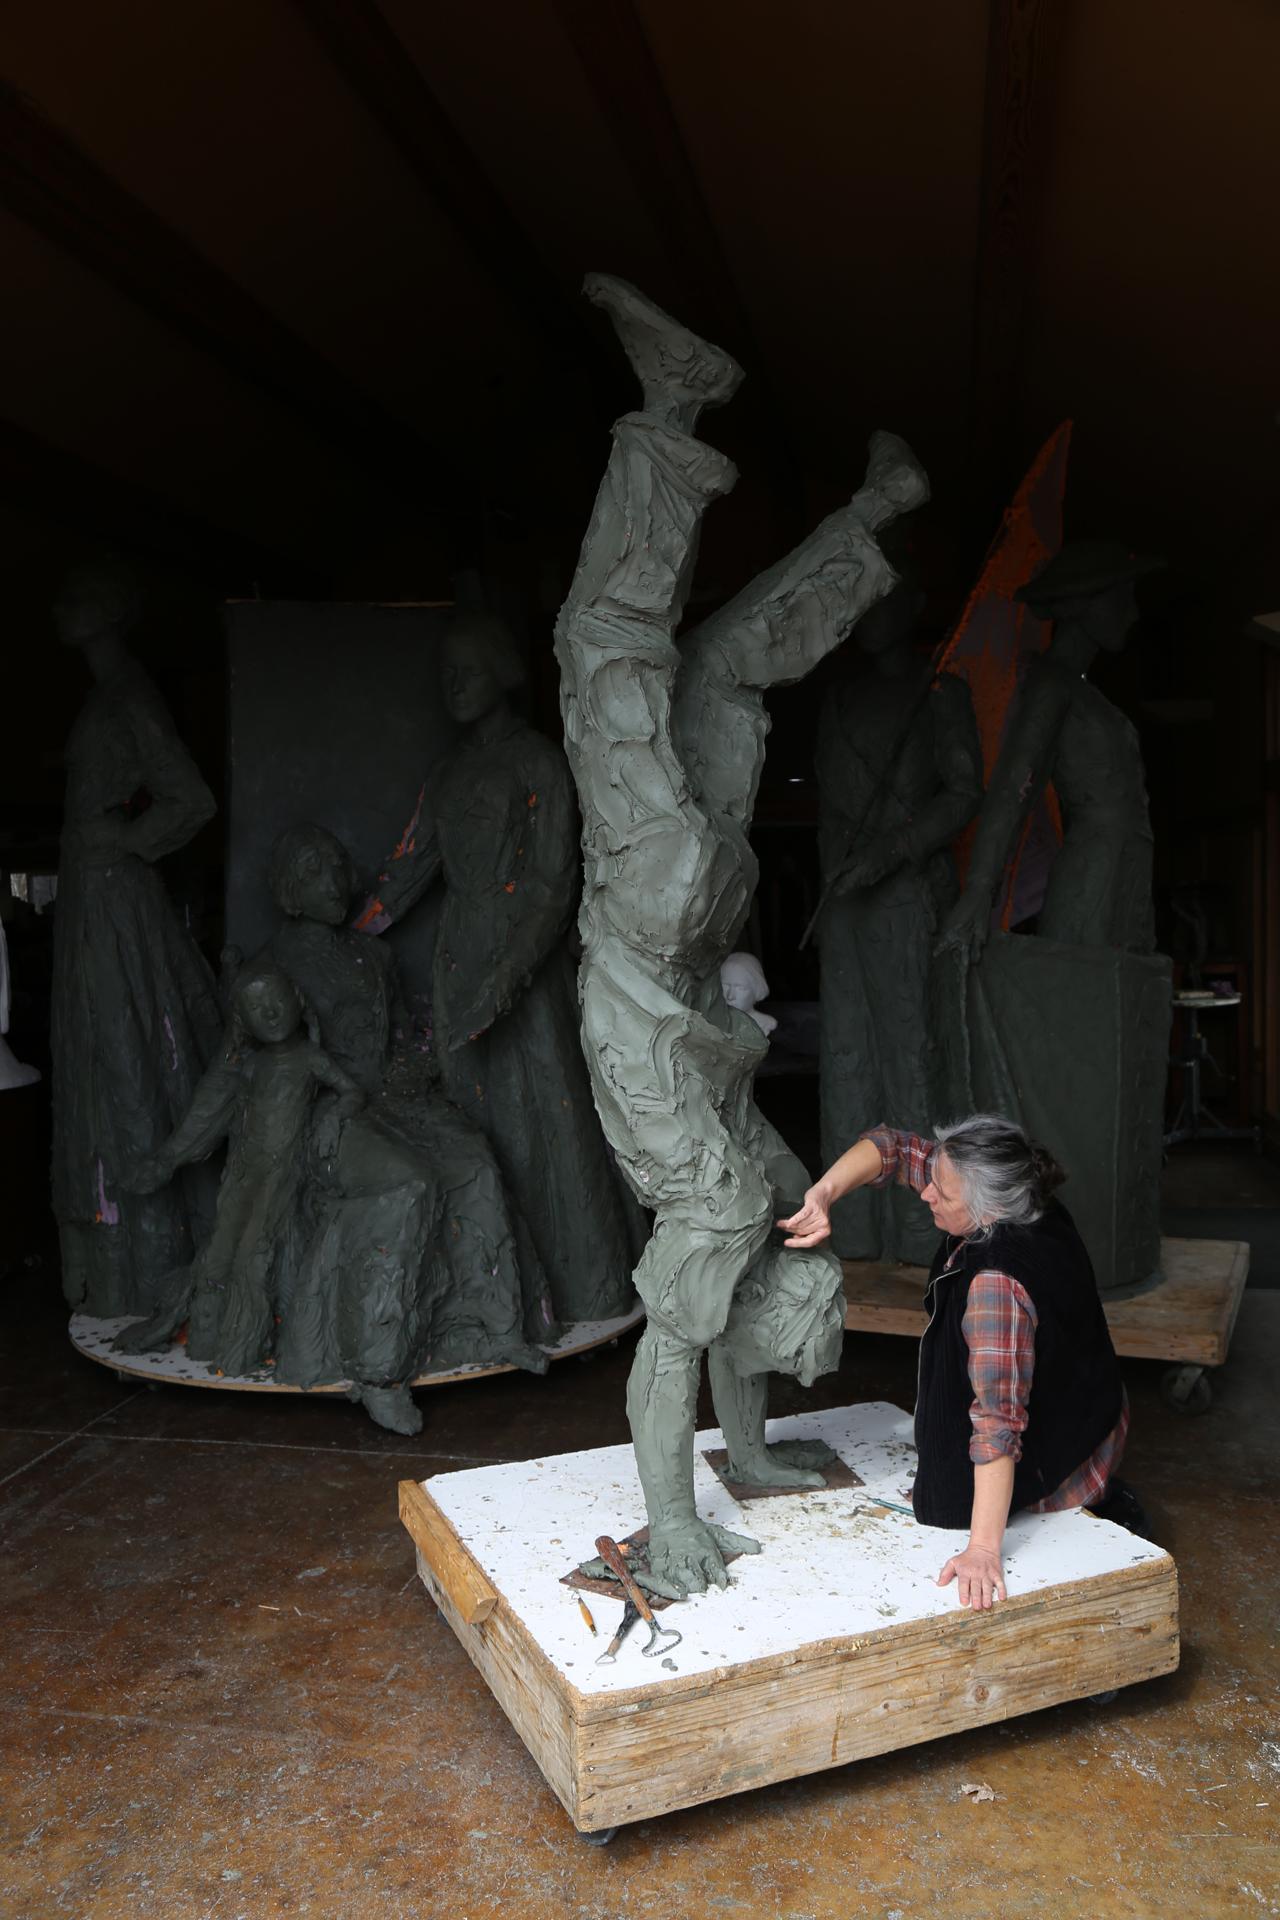 From a Different Perspective by Jane DeDecker
Abstract Expressionistic Figurative Bronze
8ft x 3ft x 3ft